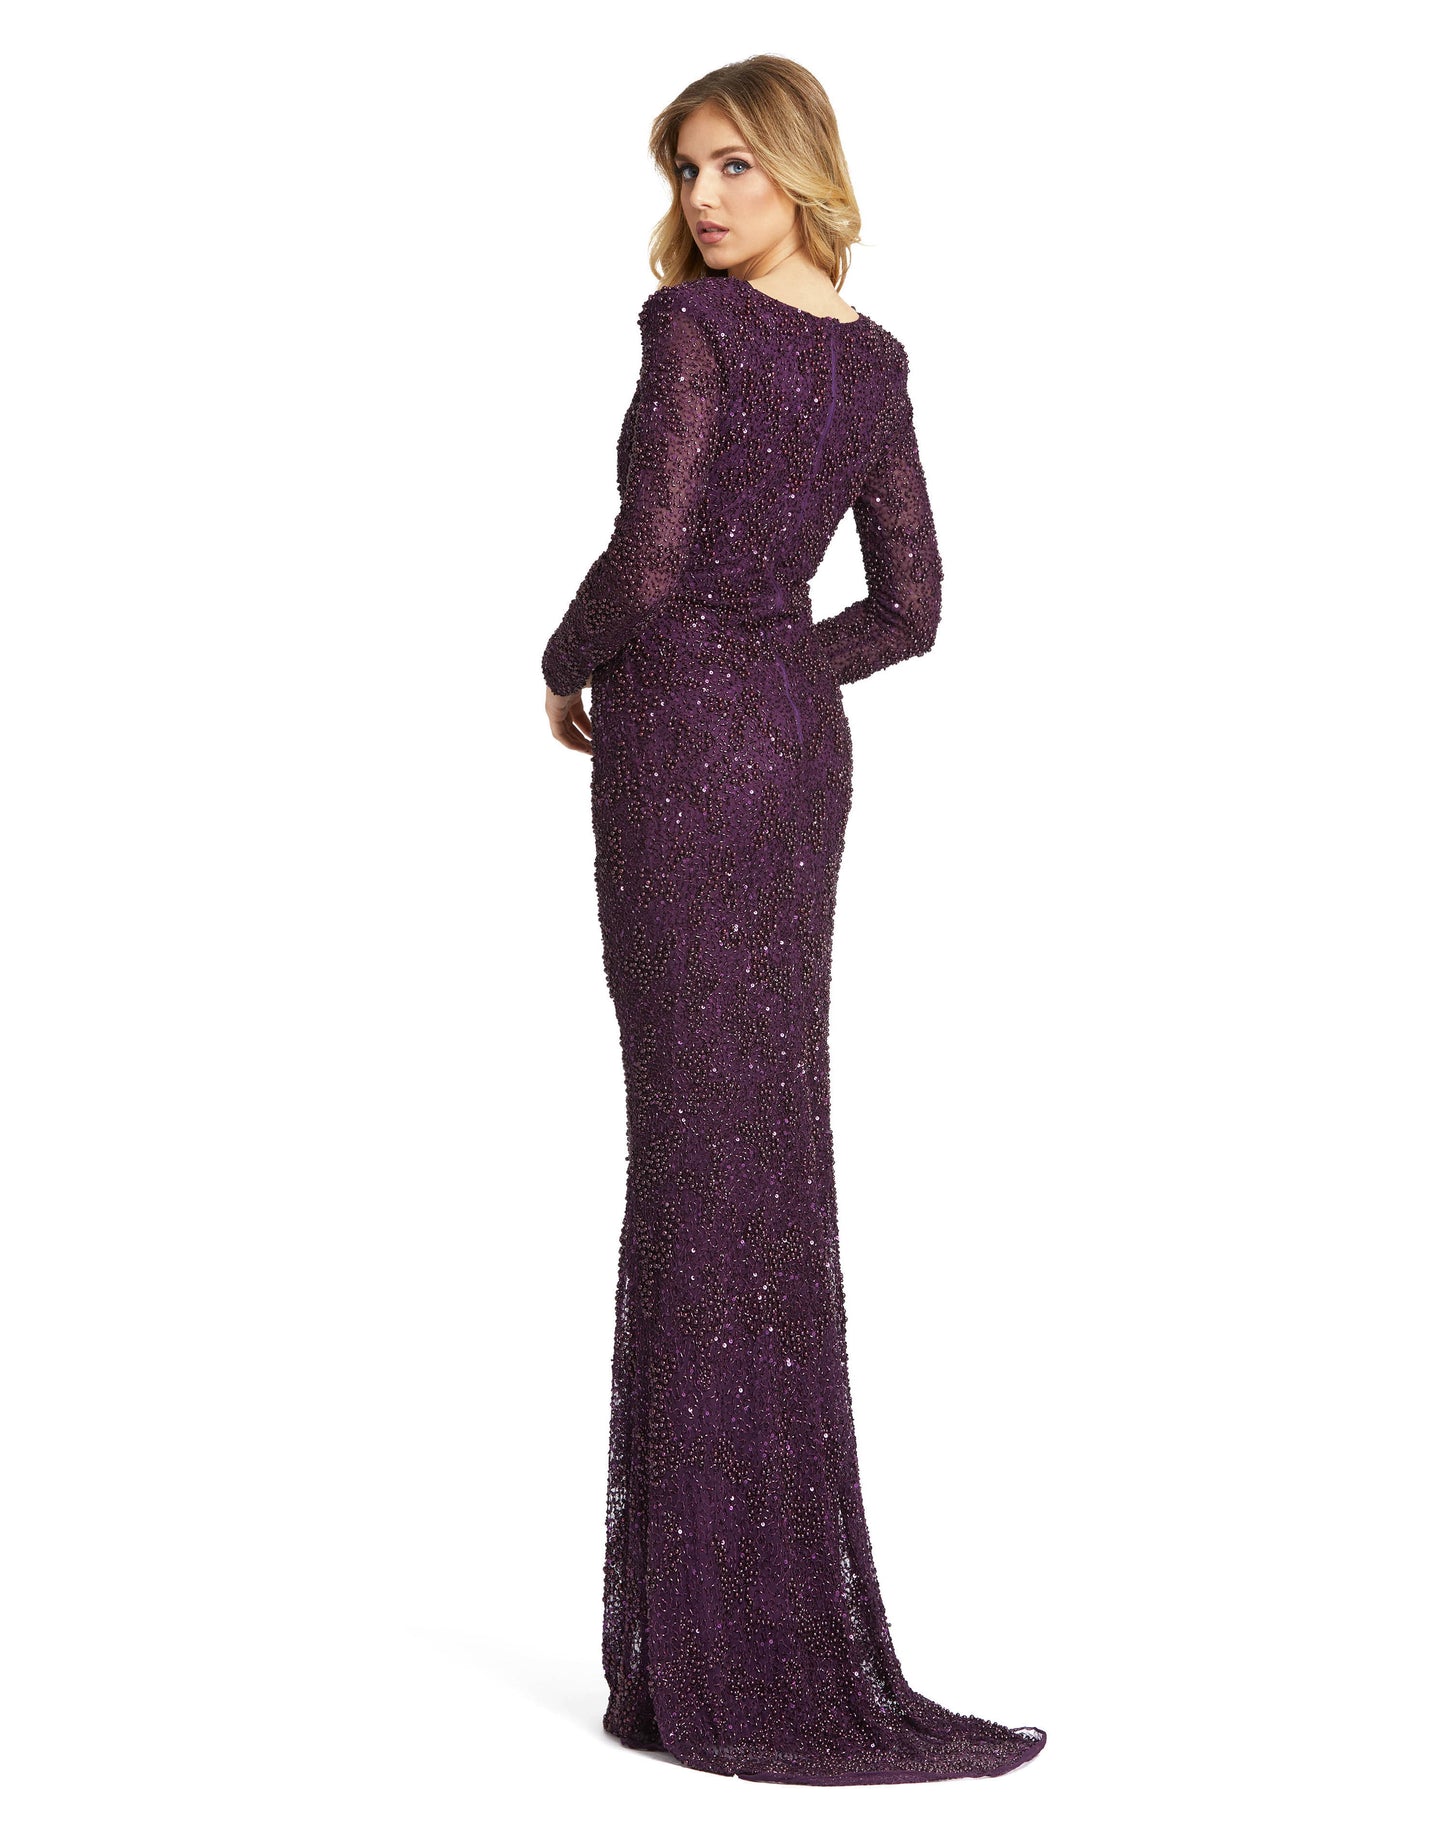 Mac Duggal Hand-beaded and sequined mesh overlay; 100% polyester lining Fully lined through bodice and skirt; semi-sheer unlined sleeves V-neckline Long sleeves Mesh bust inset Sweeping train Concealed back zipper Approx. 62.5" from top of shoulder to bot